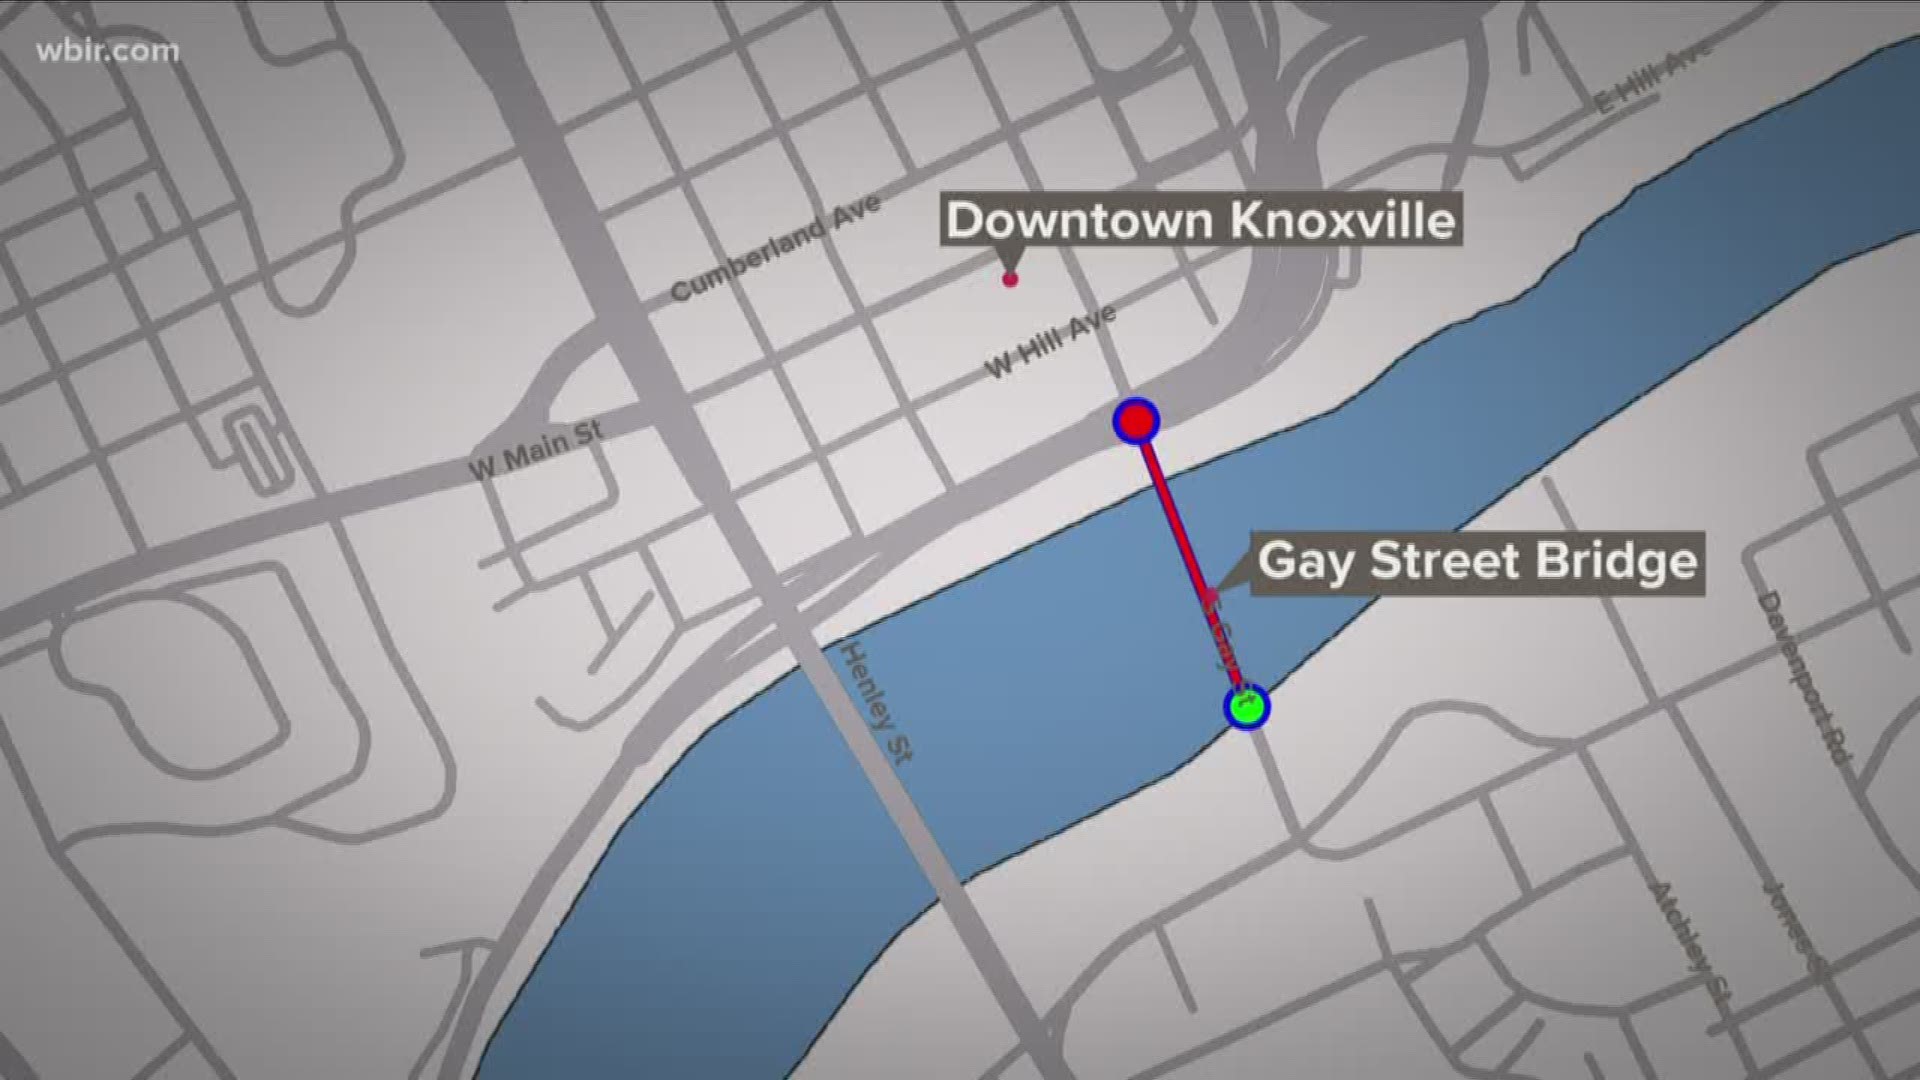 The Gay Street Bridge will close for two hours Wednesday night.